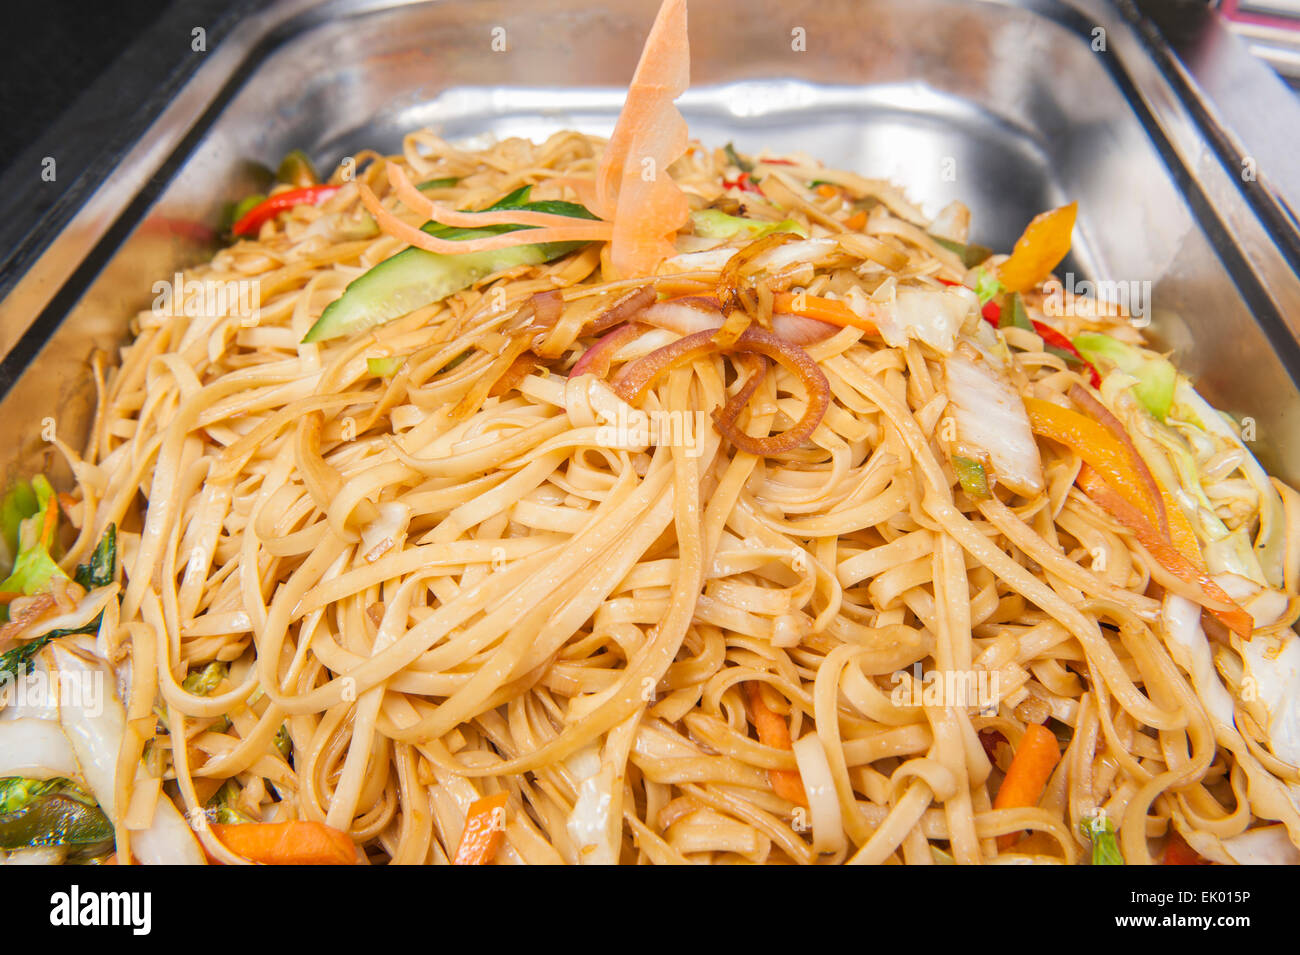 Closeup of Pad Thai chinese meal on display at a hotel restaurant buffet Stock Photo